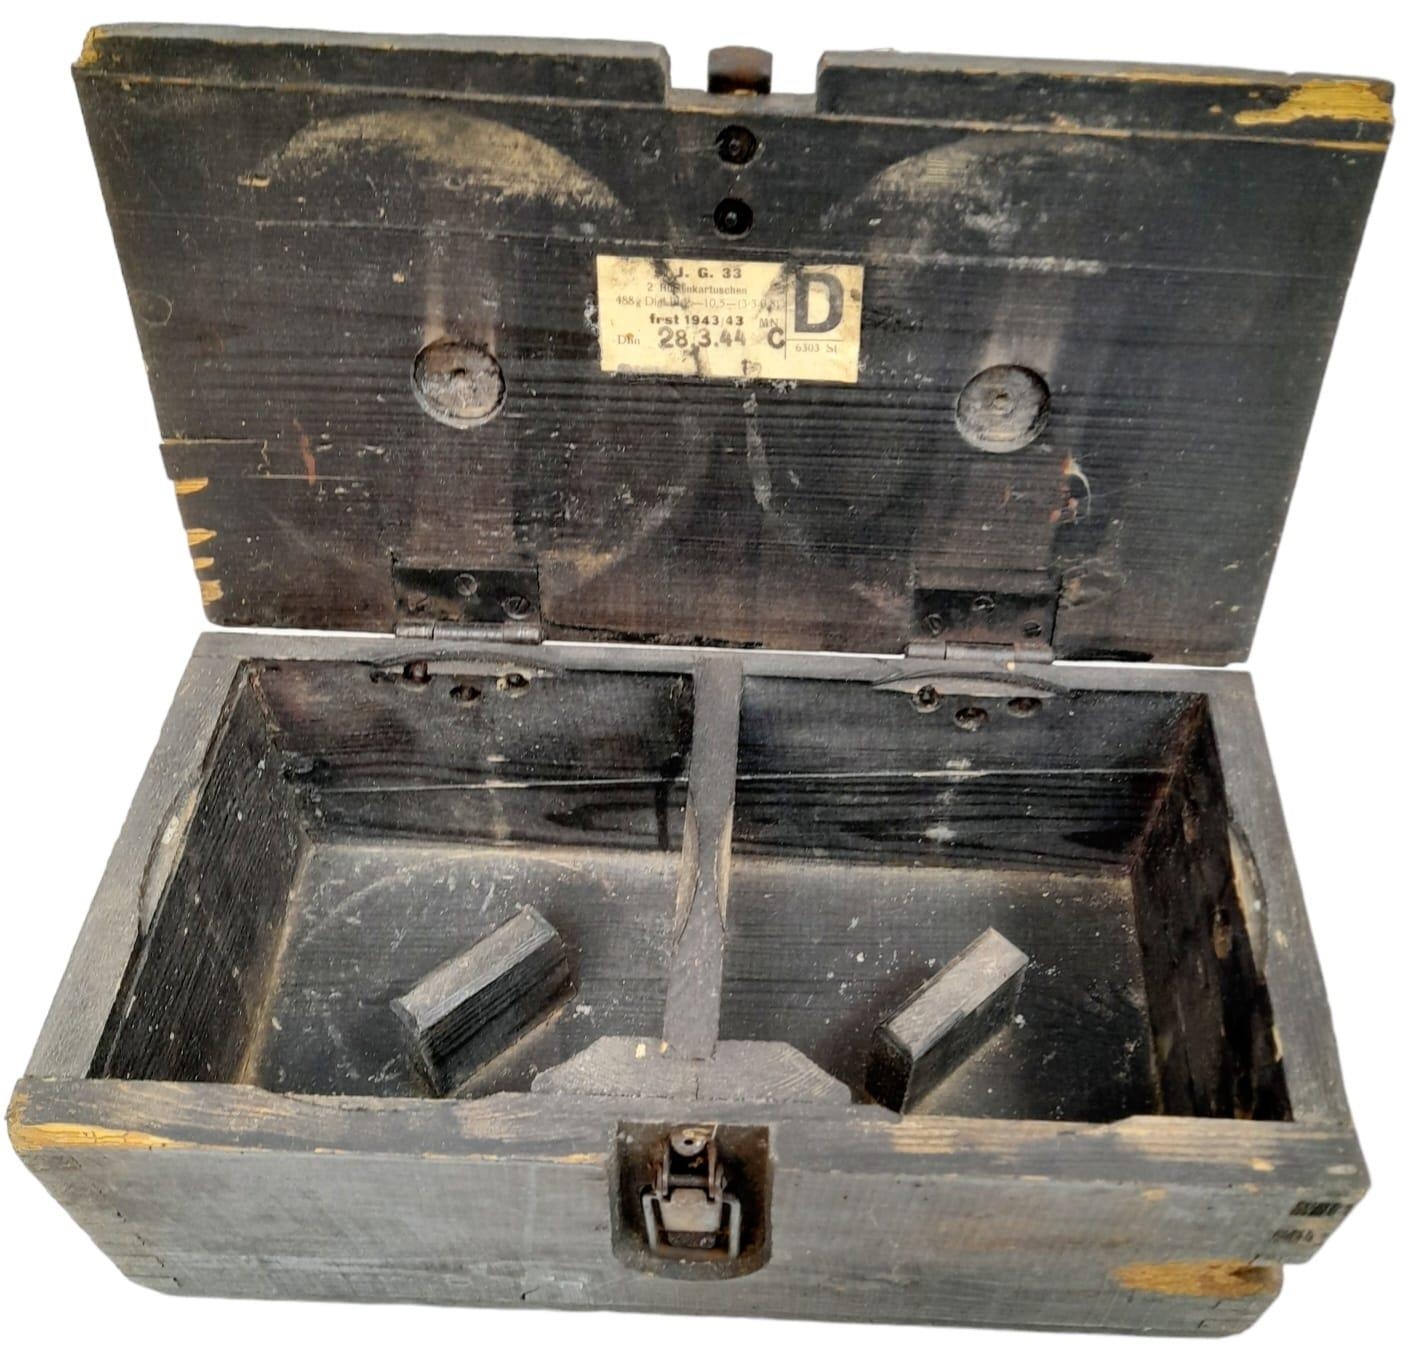 WW2 German 15cm Sig 33 Cartridge Box with original labels, stencils, and internals. - Image 2 of 15